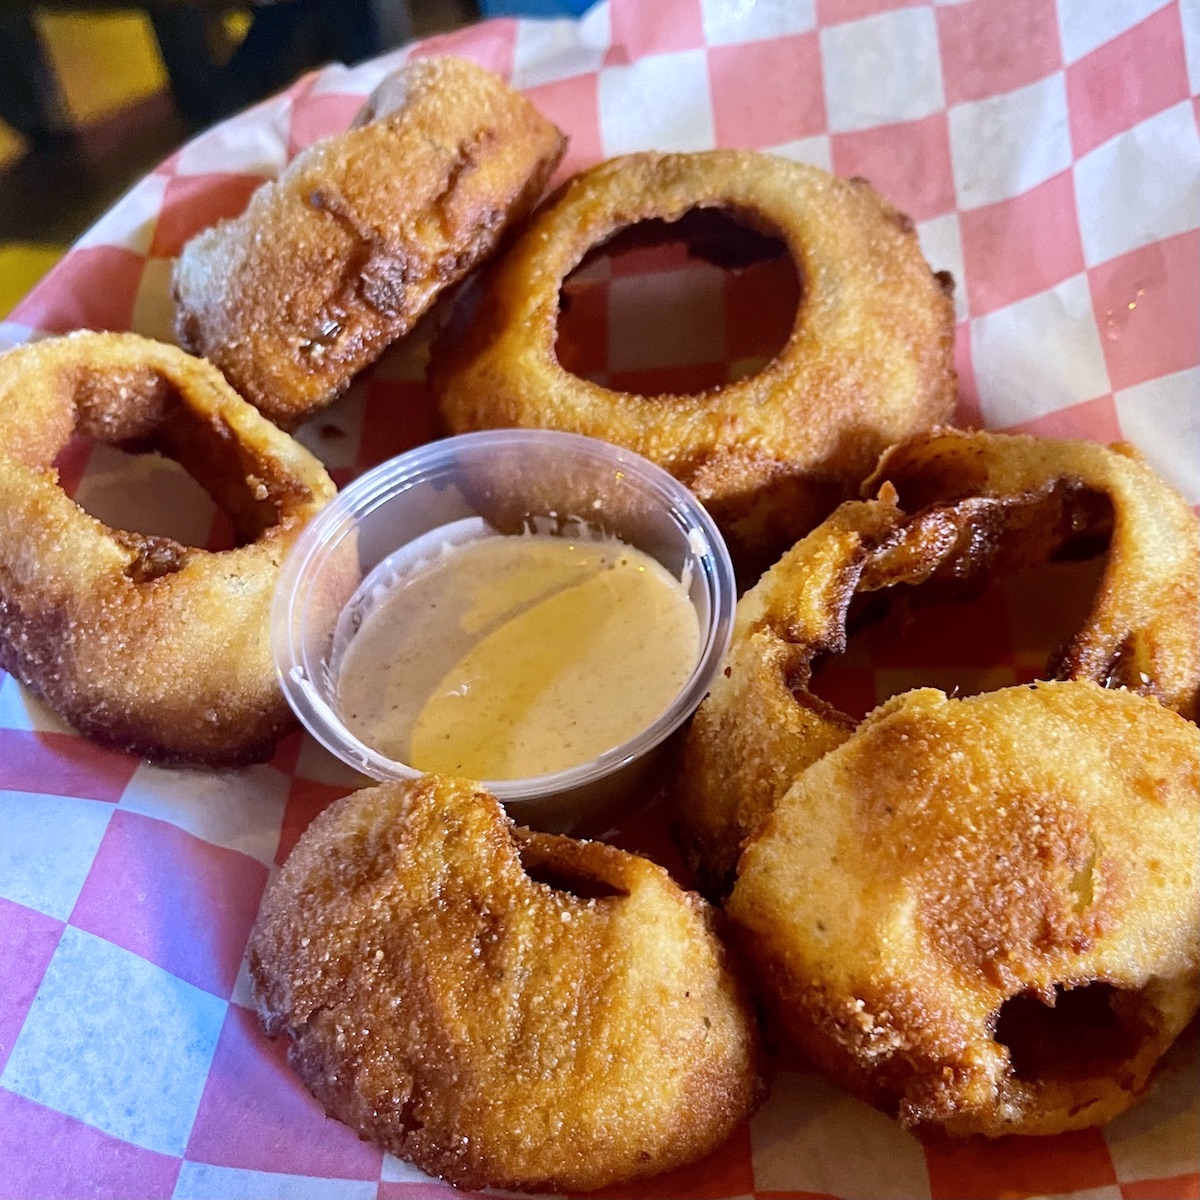 Hand-battered Onion Rings from Shorty's BBQ in Miami, Florida